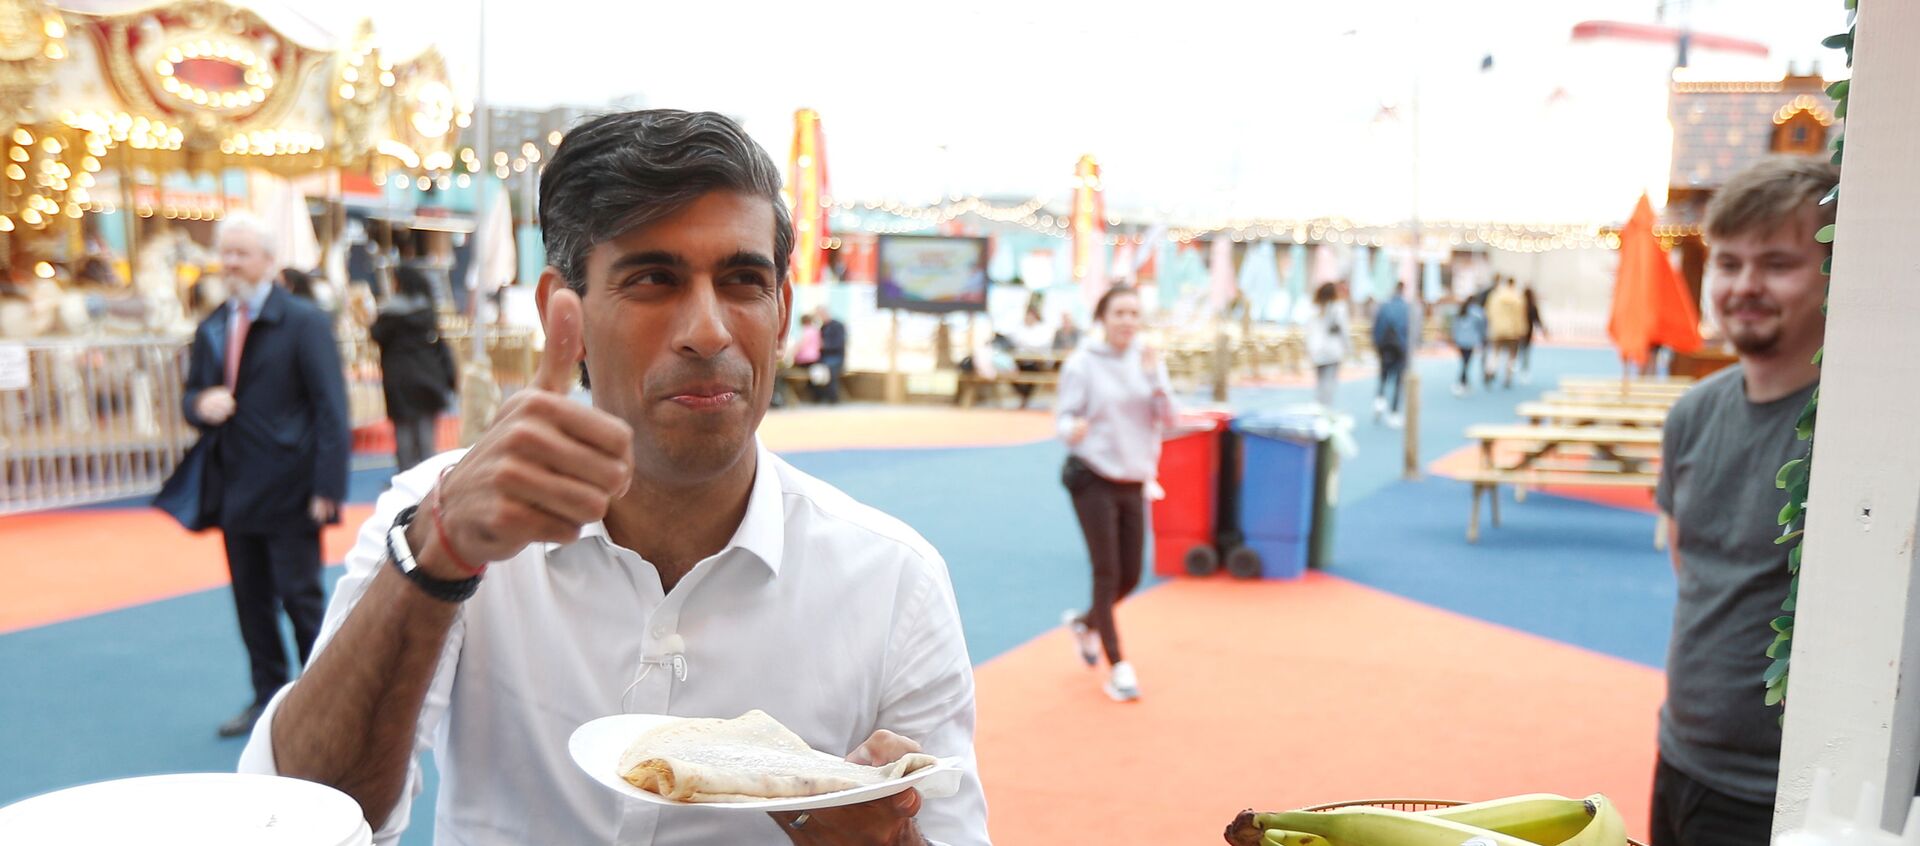 Britain’s Chancellor Rishi Sunak takes a pancake from a stall at the London Wonderground comedy and music festival venue in London - Sputnik International, 1920, 17.08.2021